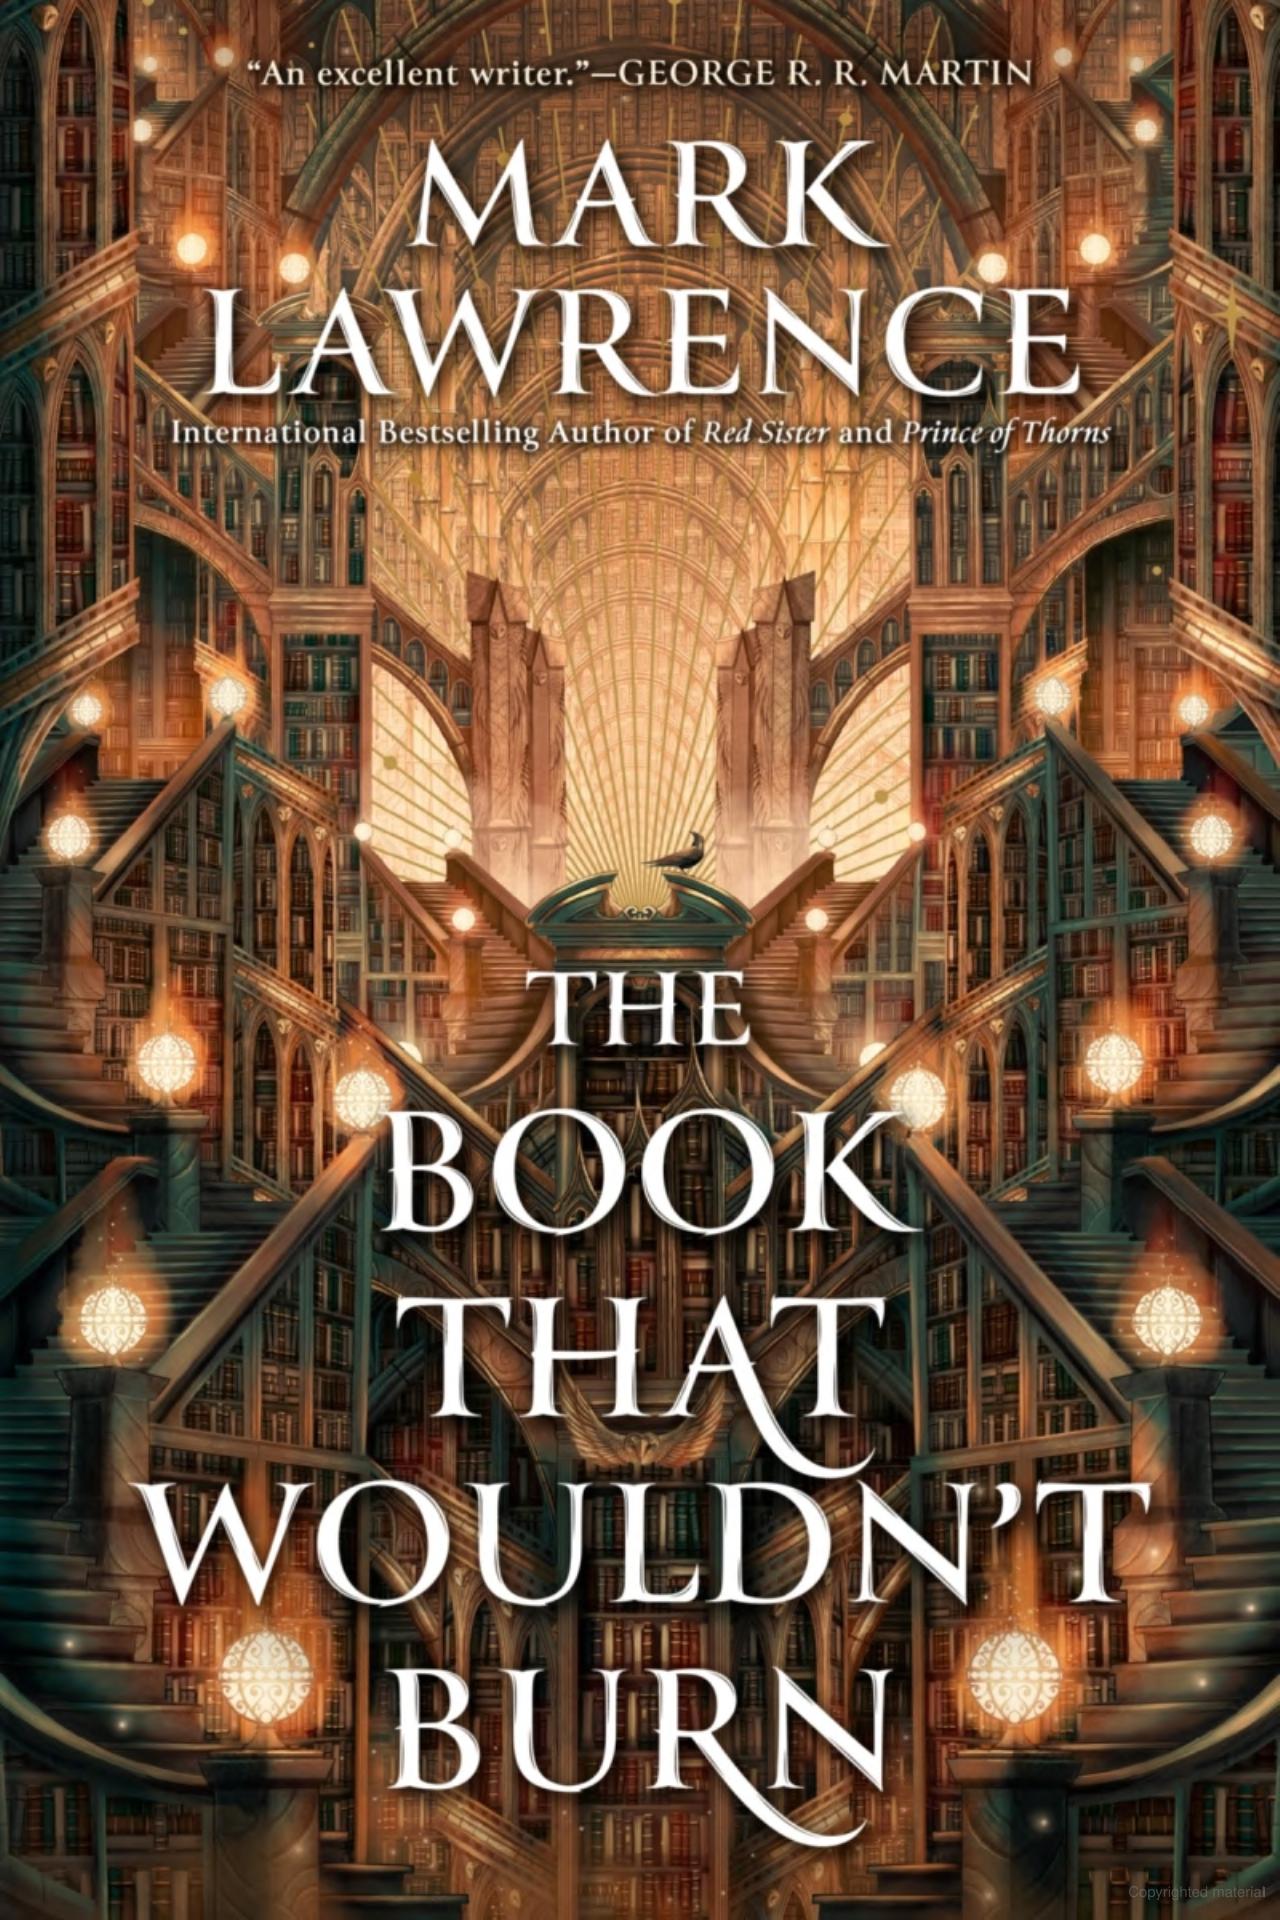 The Book That Wouldn't Burn -Mark Lawrence - The Society for Unusual Books